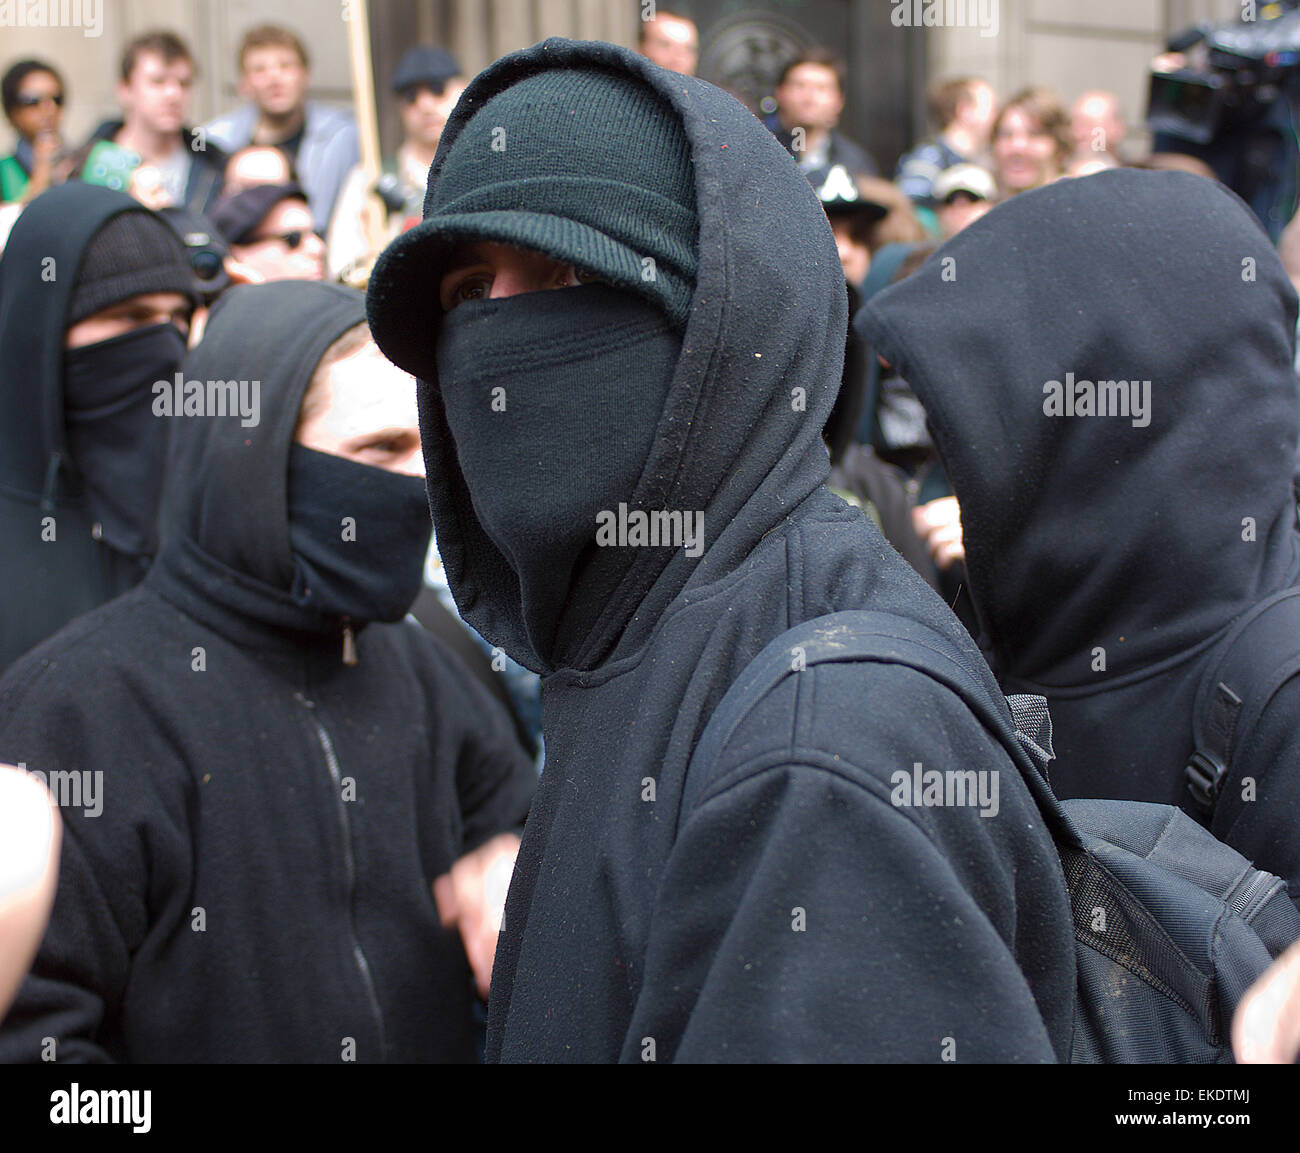 These masked men in hoodies looked ready for trouble at the G20 protest outside the Bank of England. Stock Photo